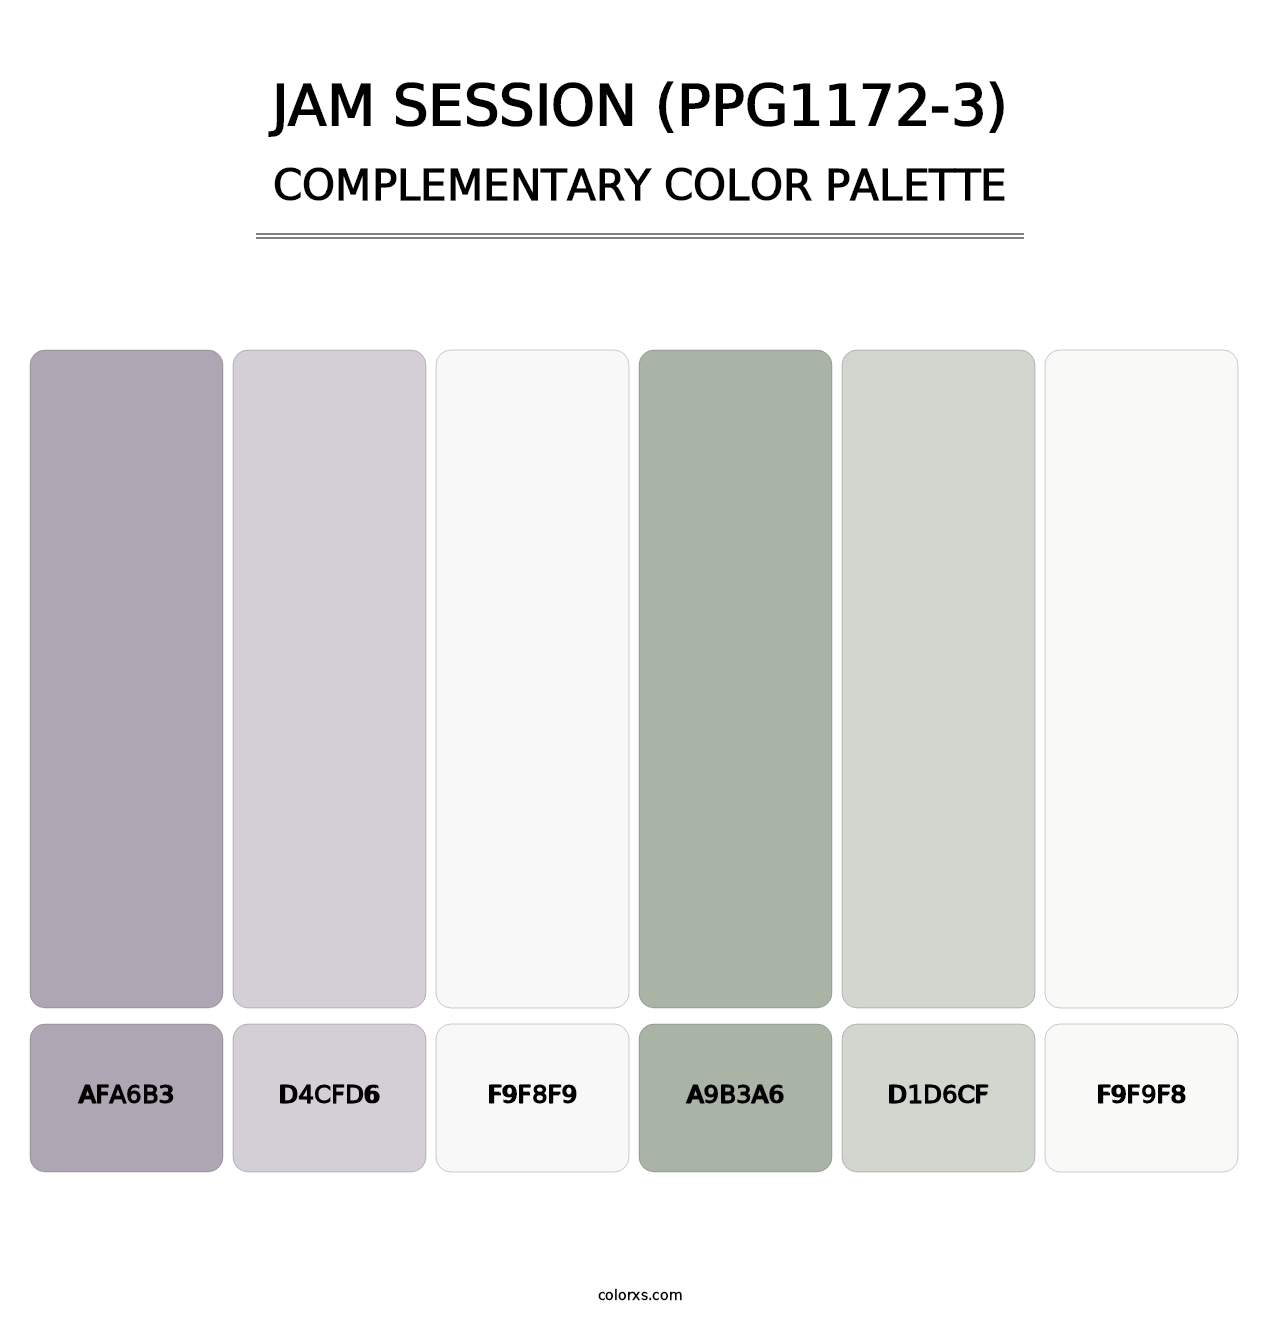 Jam Session (PPG1172-3) - Complementary Color Palette